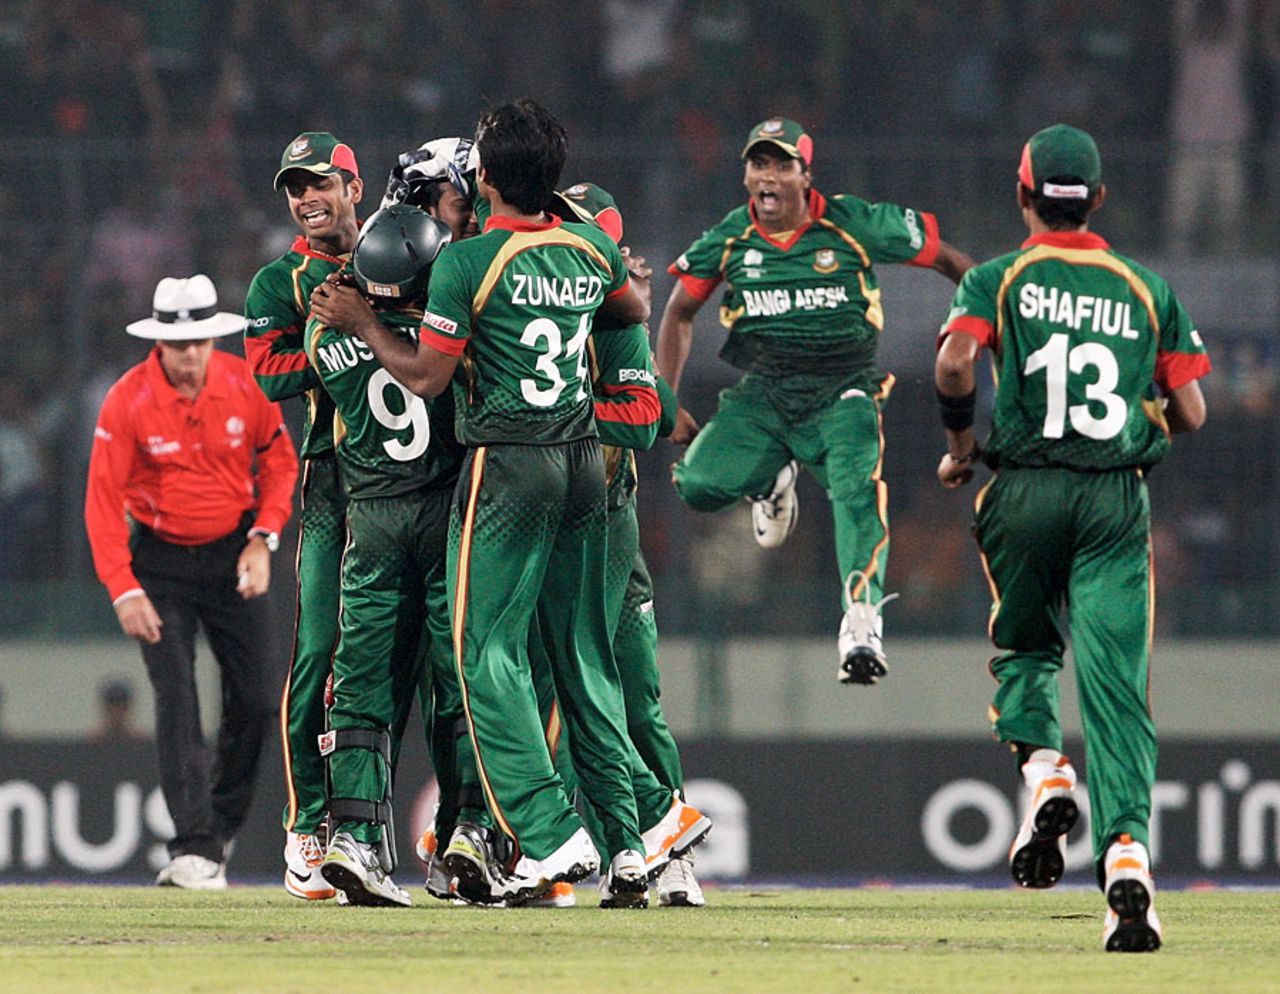 Shakib Al Hasan removed his opposite number William Porterfield in his first over, Bangladesh v Ireland, World Cup 2011, Mirpur, February 25, 2010
